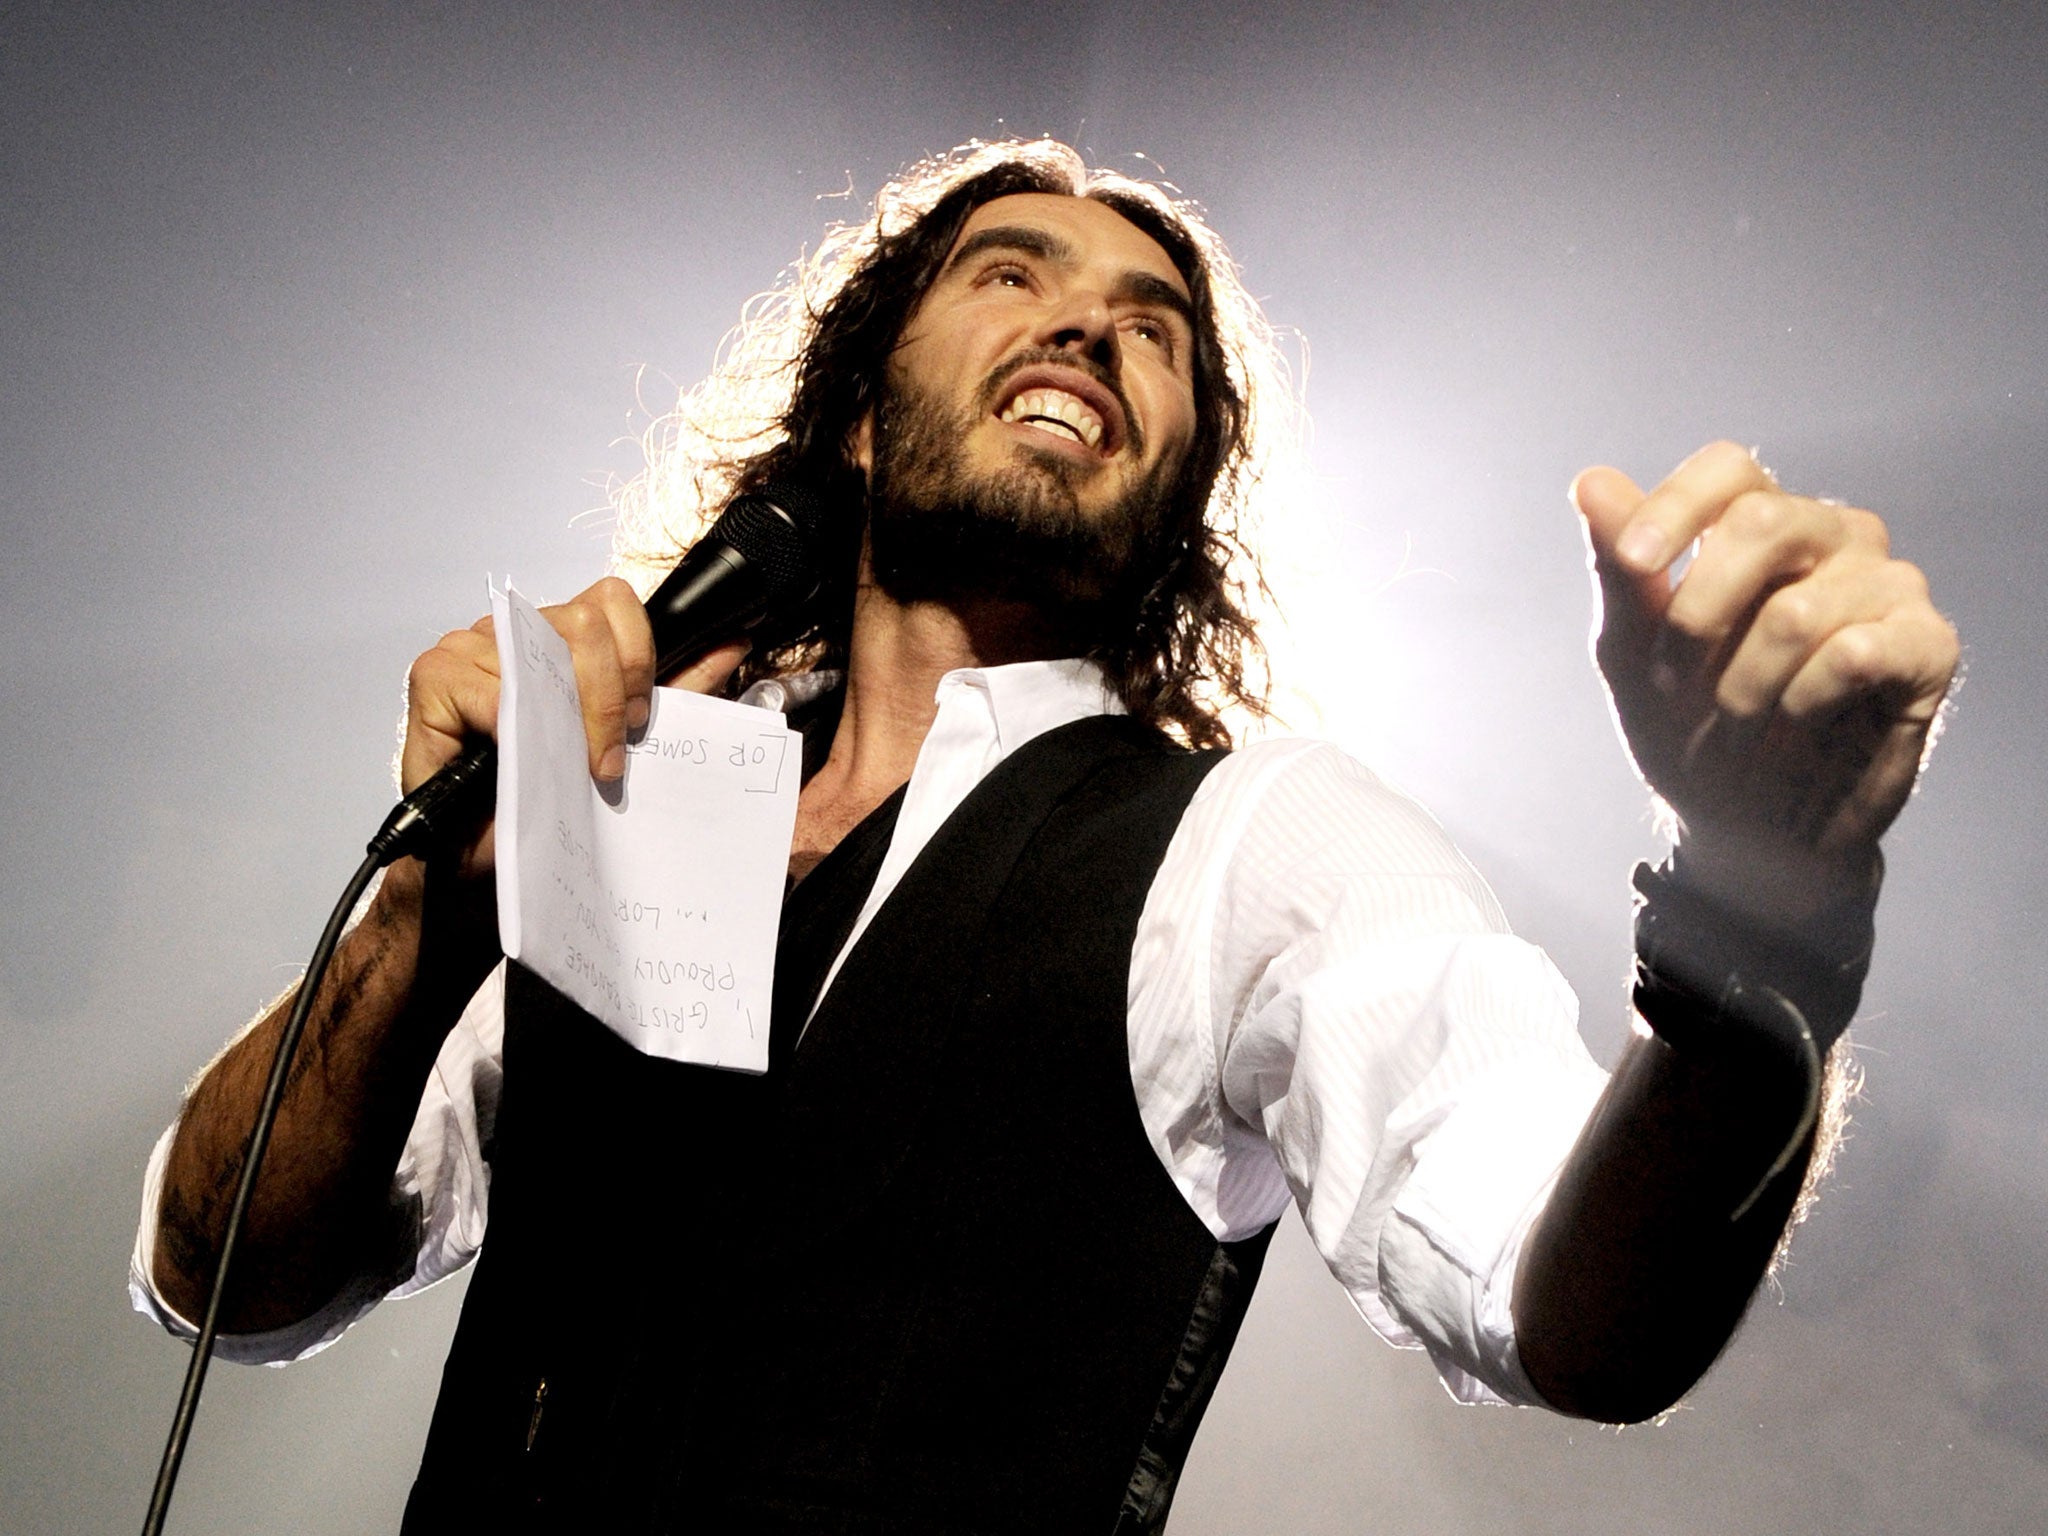 Reinvention has always been a key part of Russell Brand’s public persona